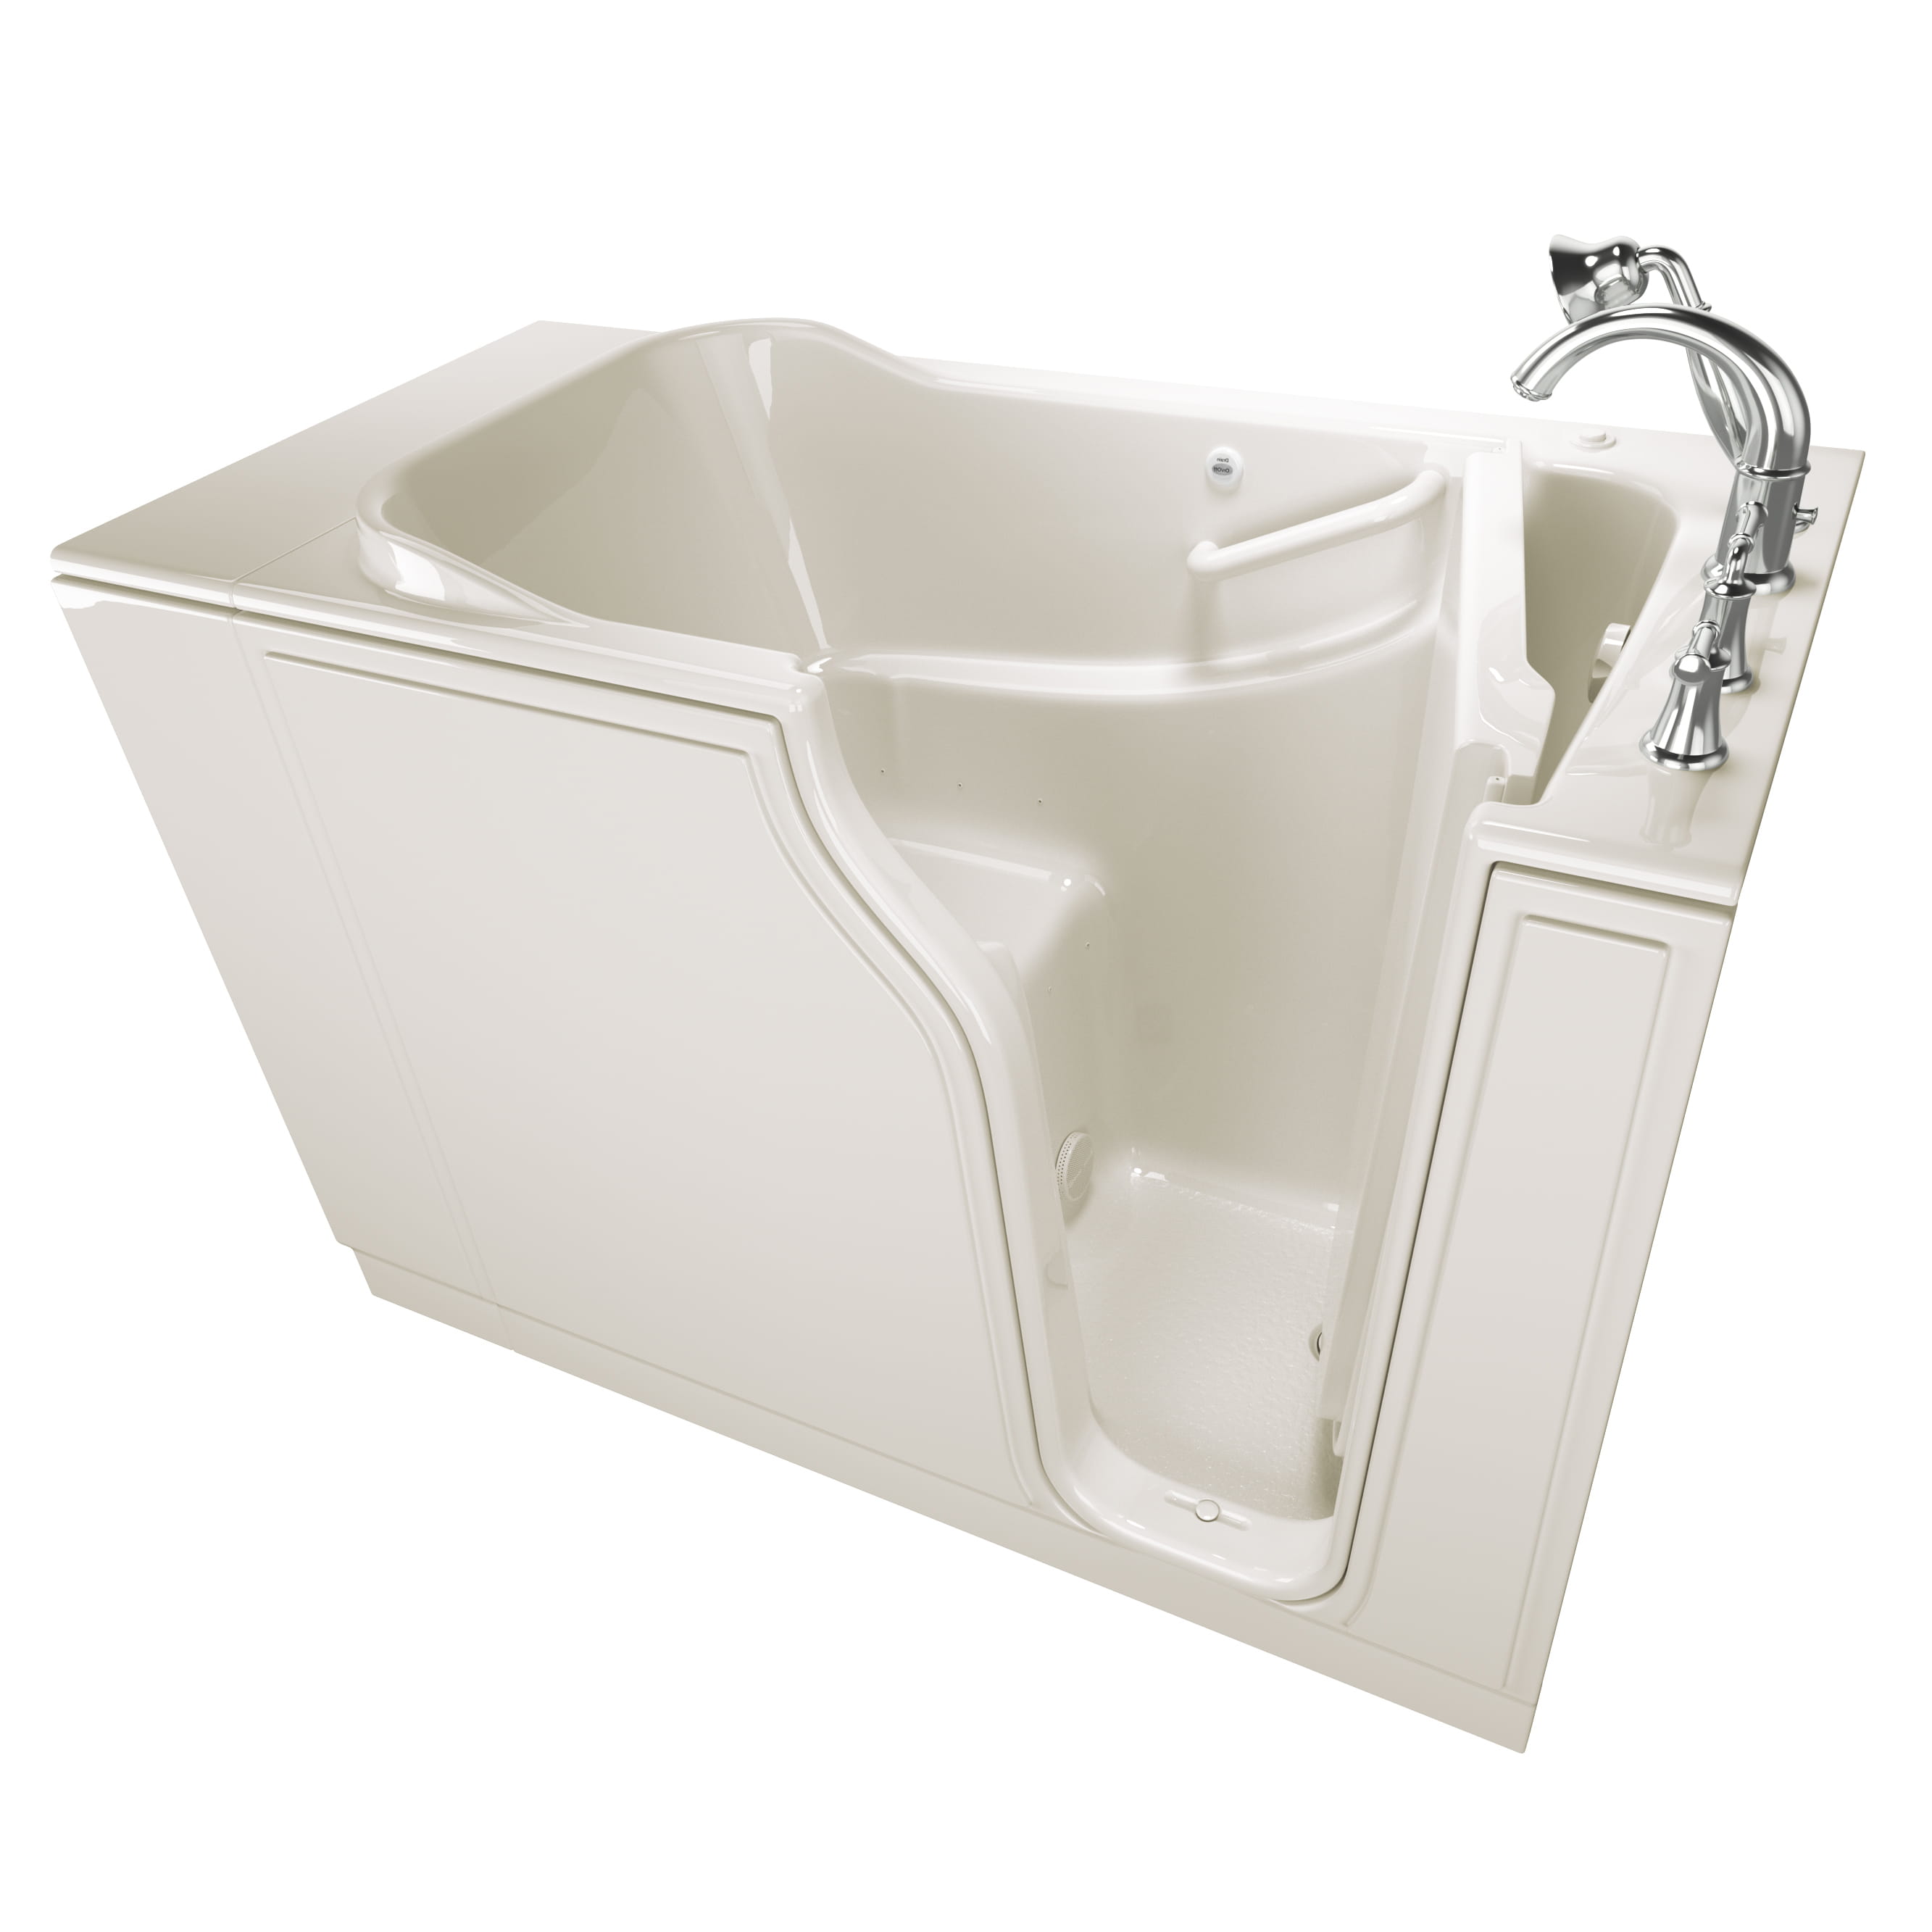 Gelcoat Value Series 30 x 52 -Inch Walk-in Tub With Air Spa System - Right-Hand Drain With Faucet